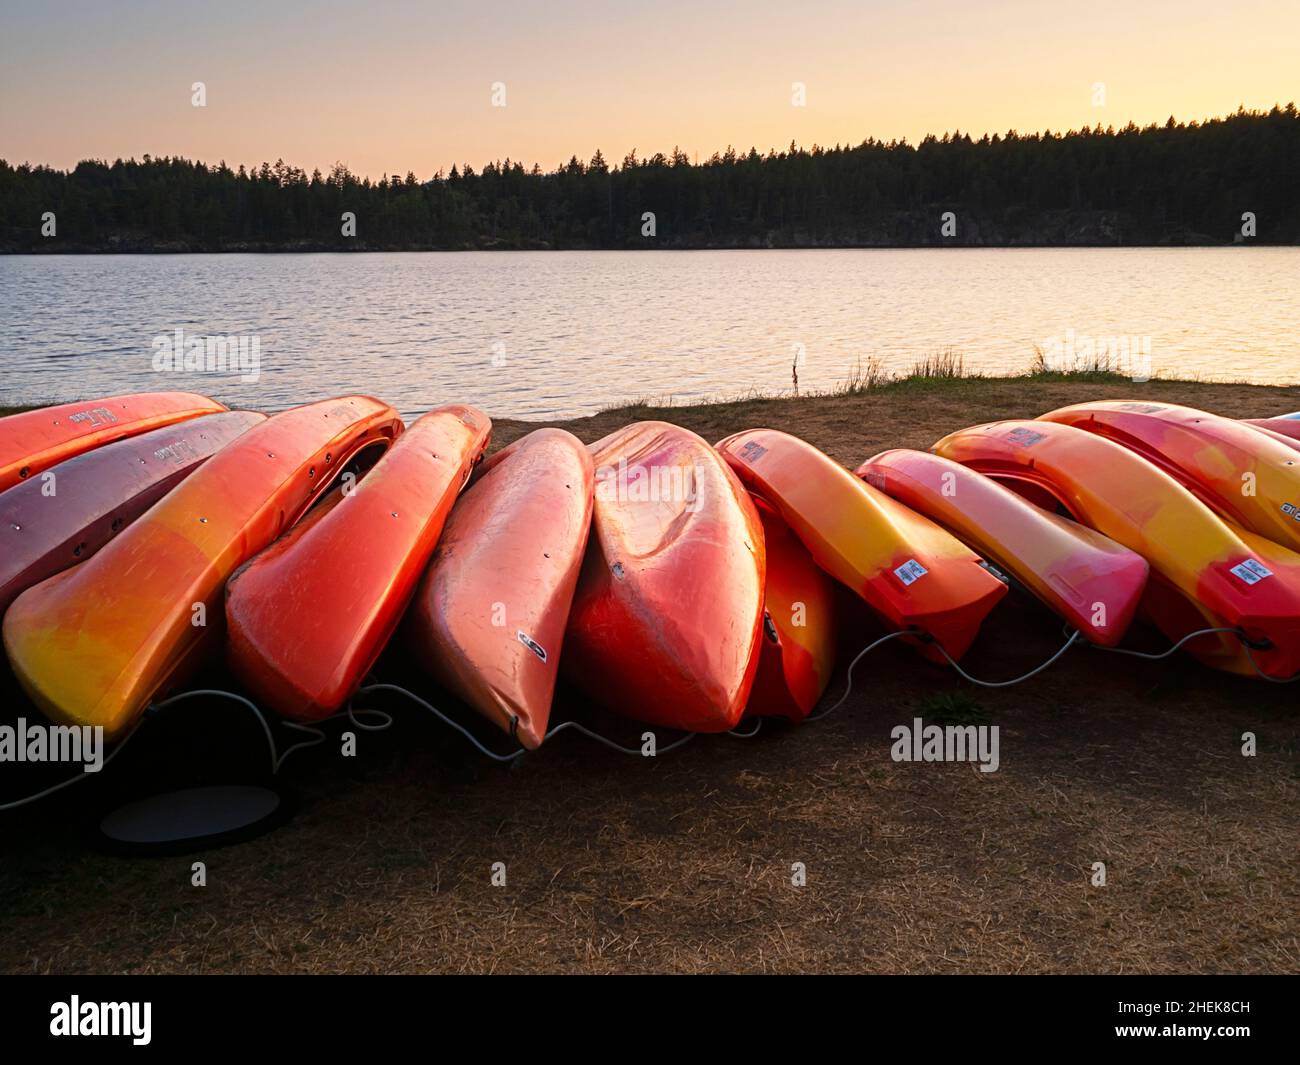 WA21055-00...WASHINGTON - Rental kayaks tied up for the night on the shores of Cascade Lake in Moran State Park on Orcas Island. Stock Photo